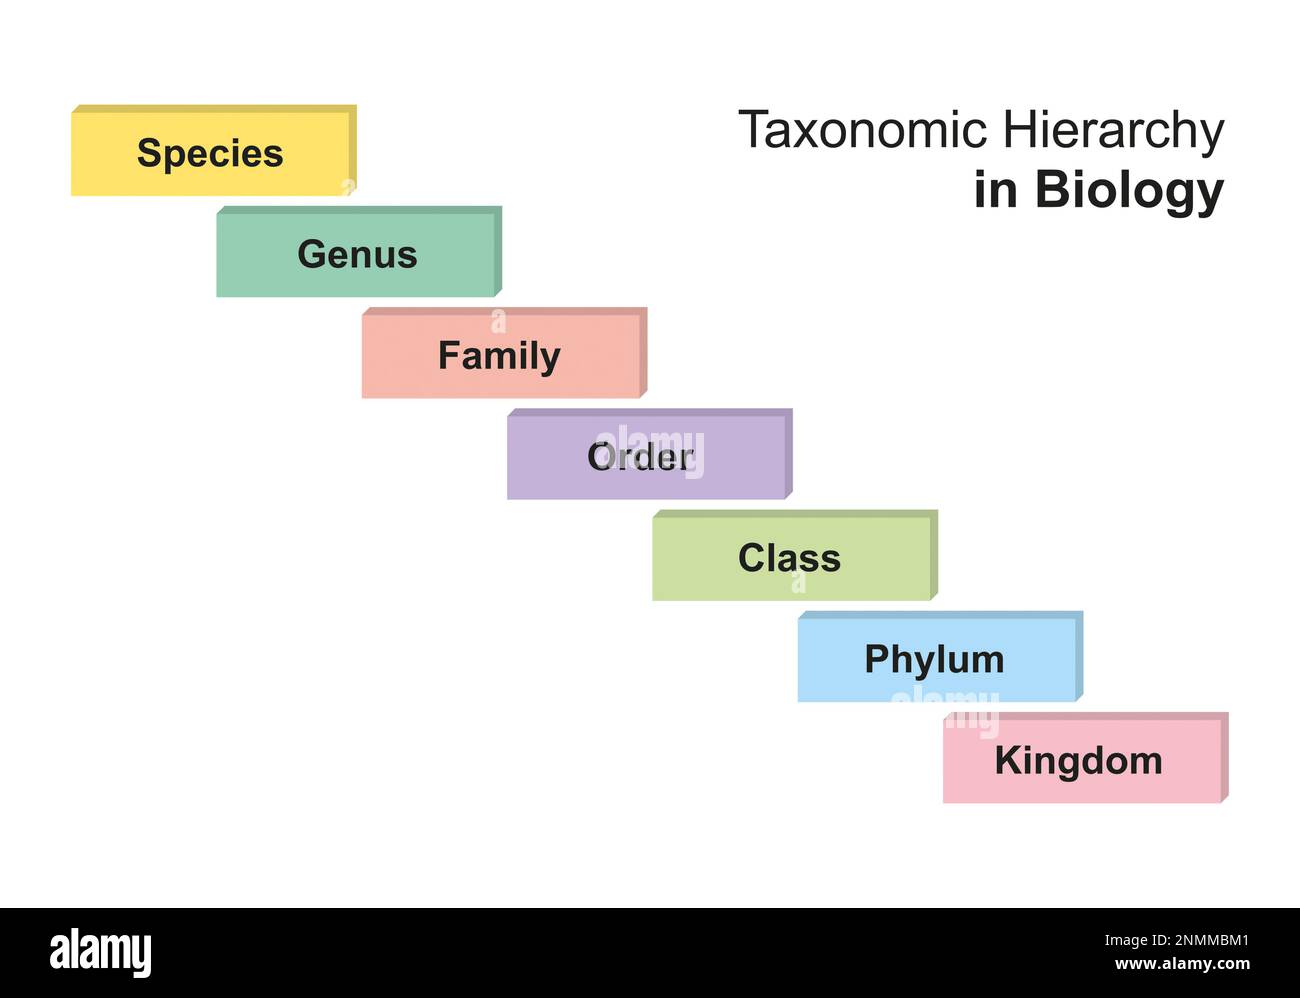 Taxonomic hierarchy in biology, illustration Stock Photo